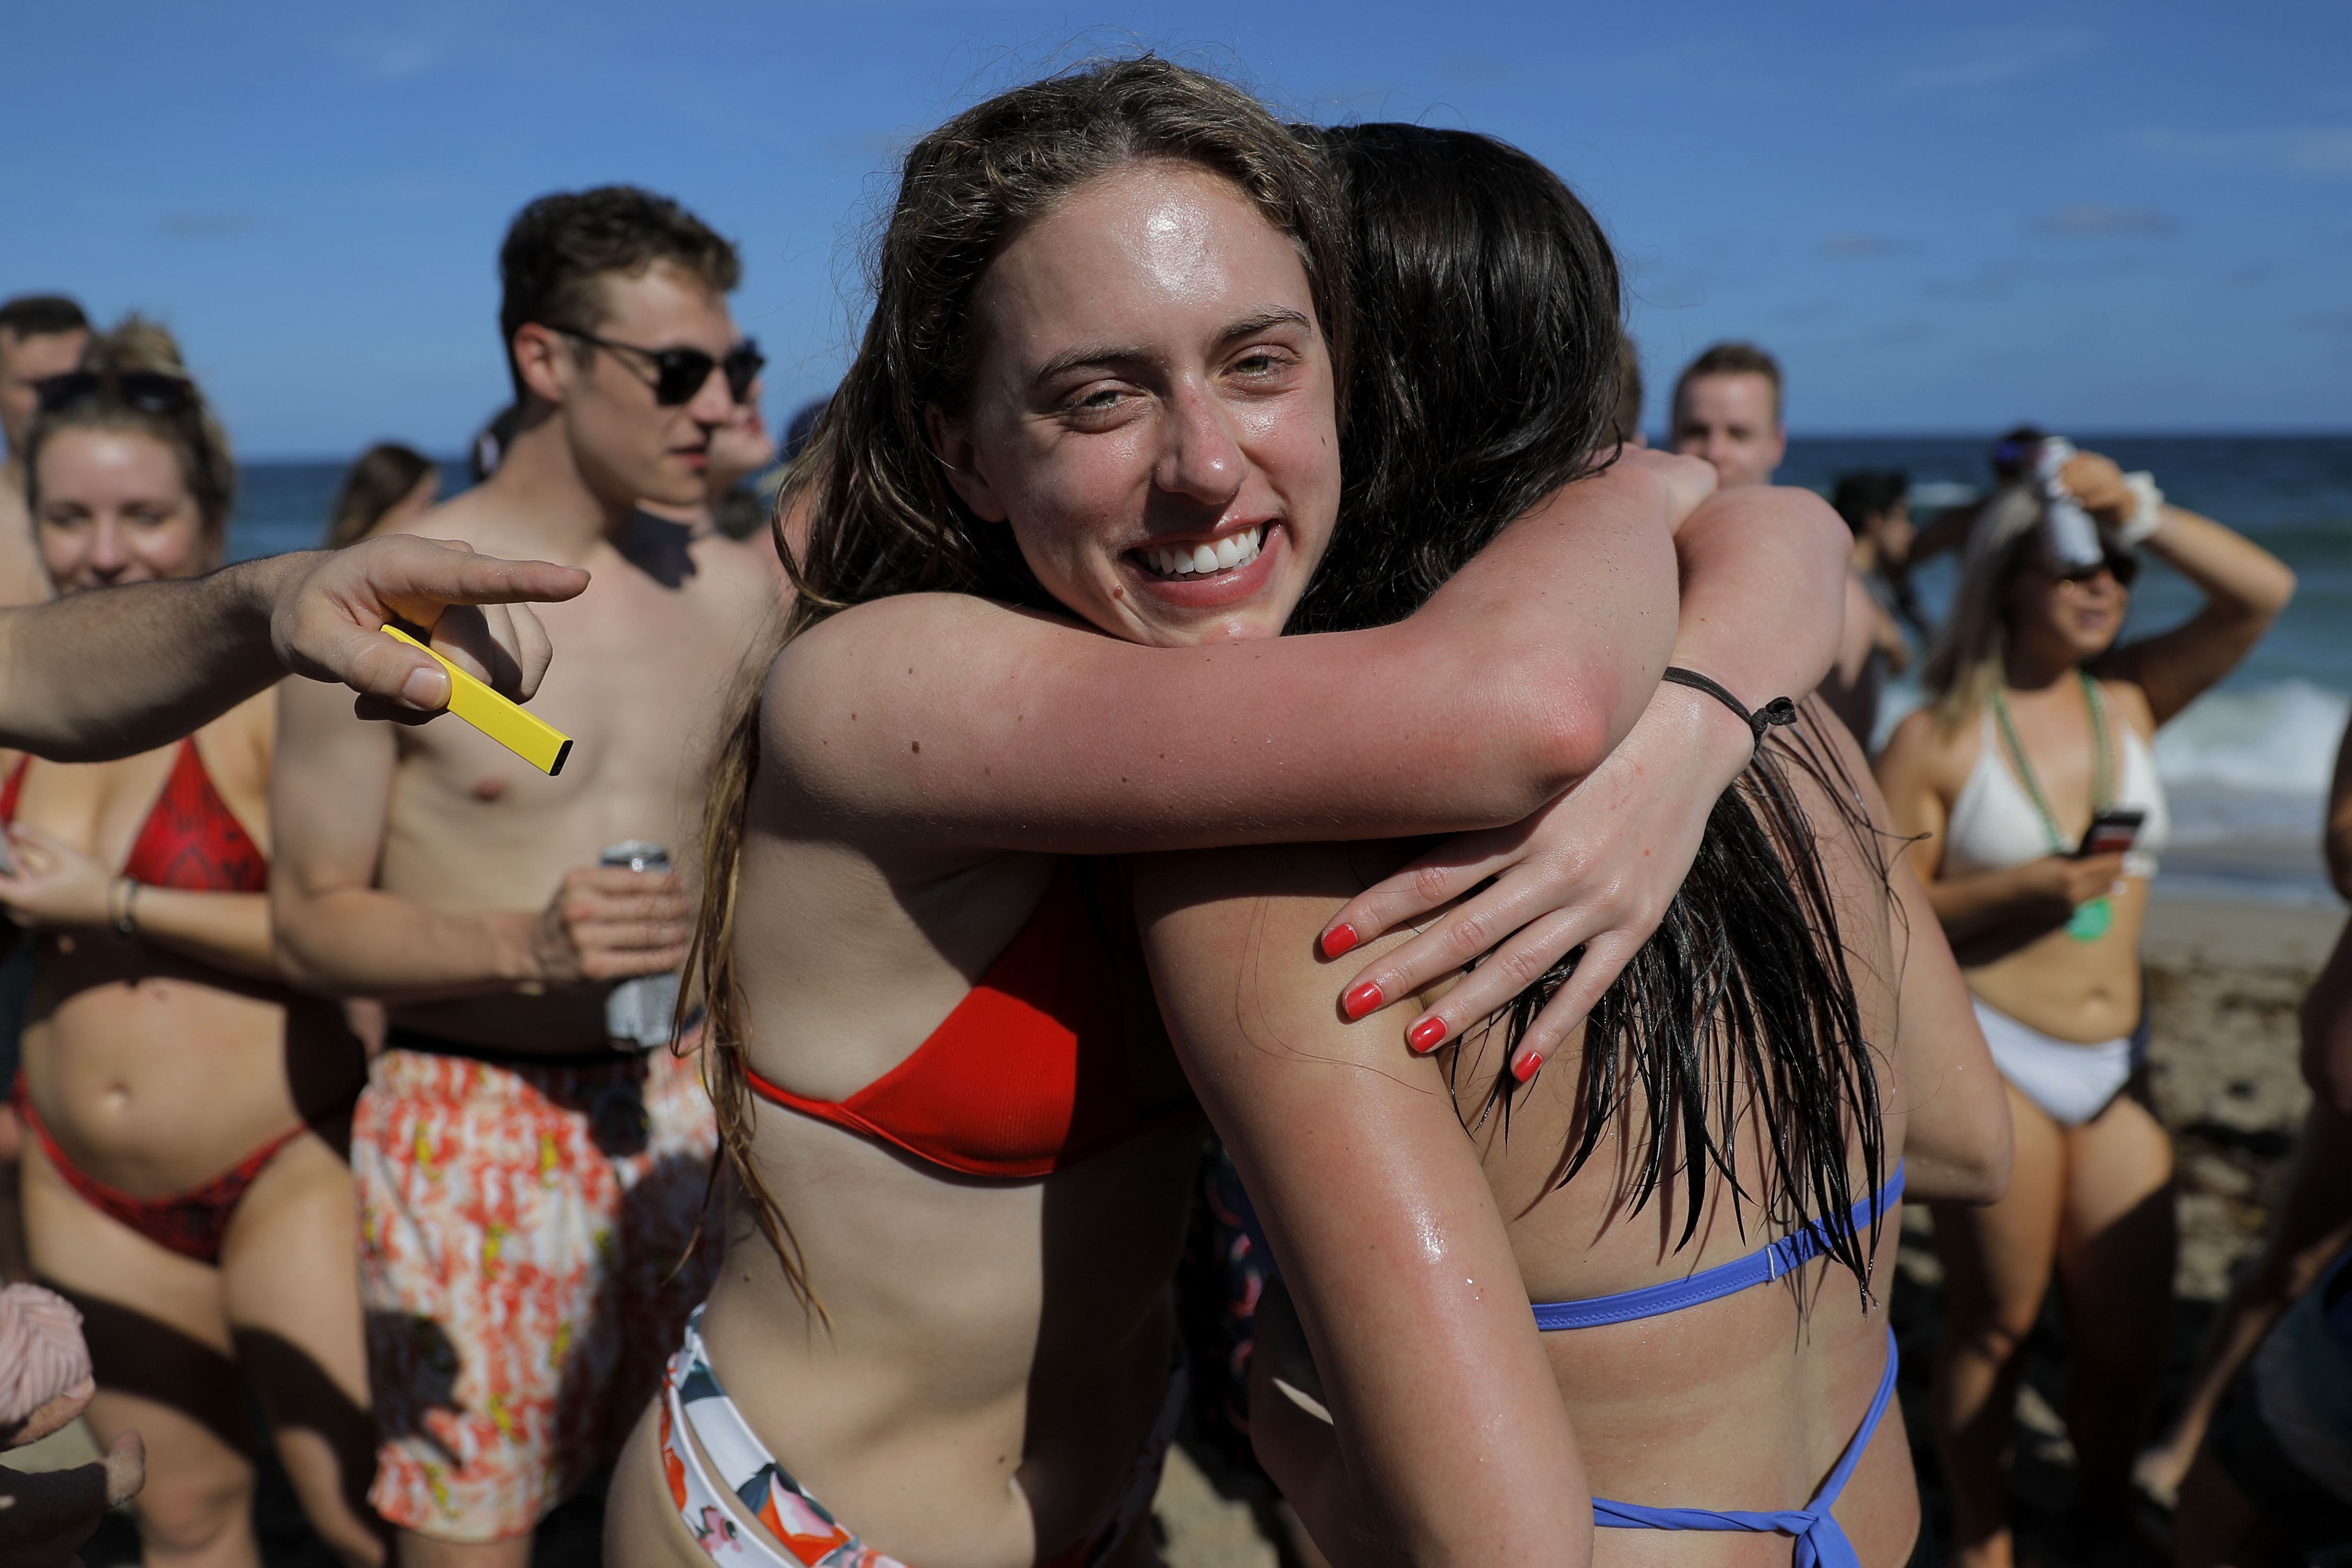 Two spring break revelers hug while partyng in a large crowd on the beach, Tuesday, March 17, 2020, in Pompano Beach, Fla. 